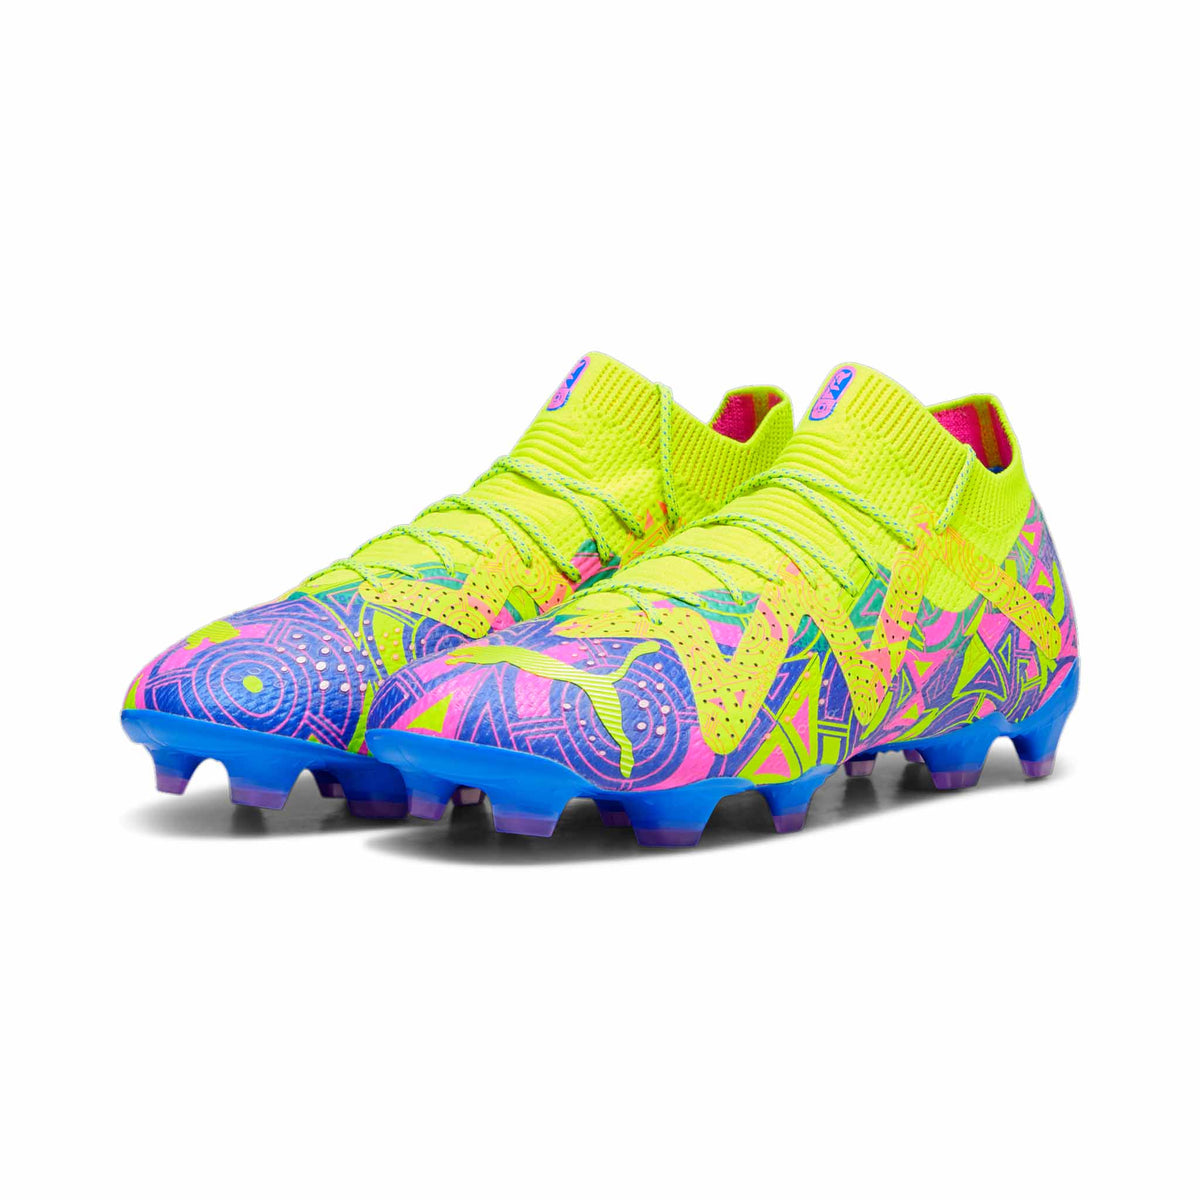 Puma Future Ultimate Energy FG/AG chaussures de soccer a crampons - Ultra Blue / Yellow Alert / Pink